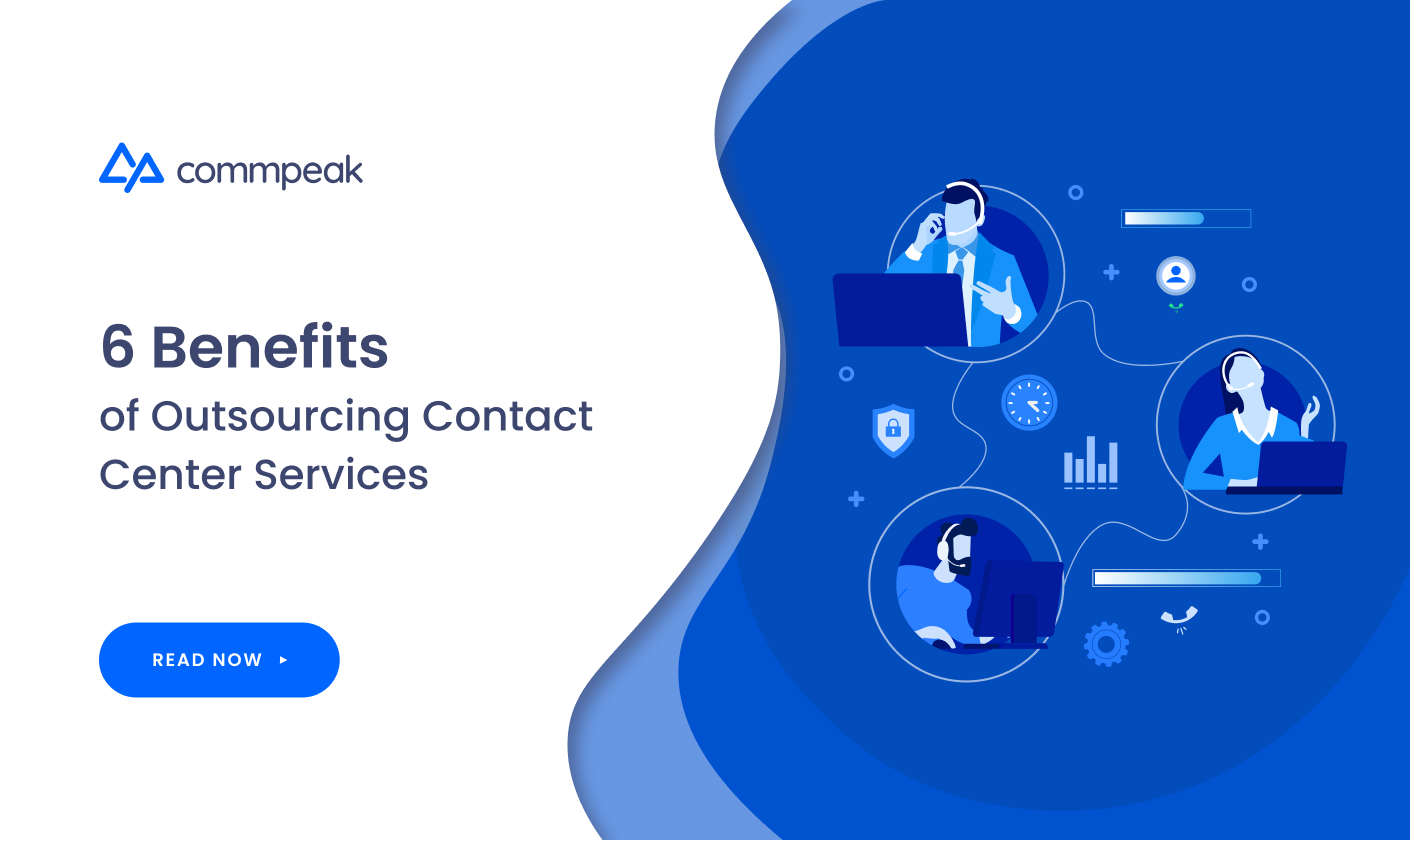 6 Benefits of outsourcing call center